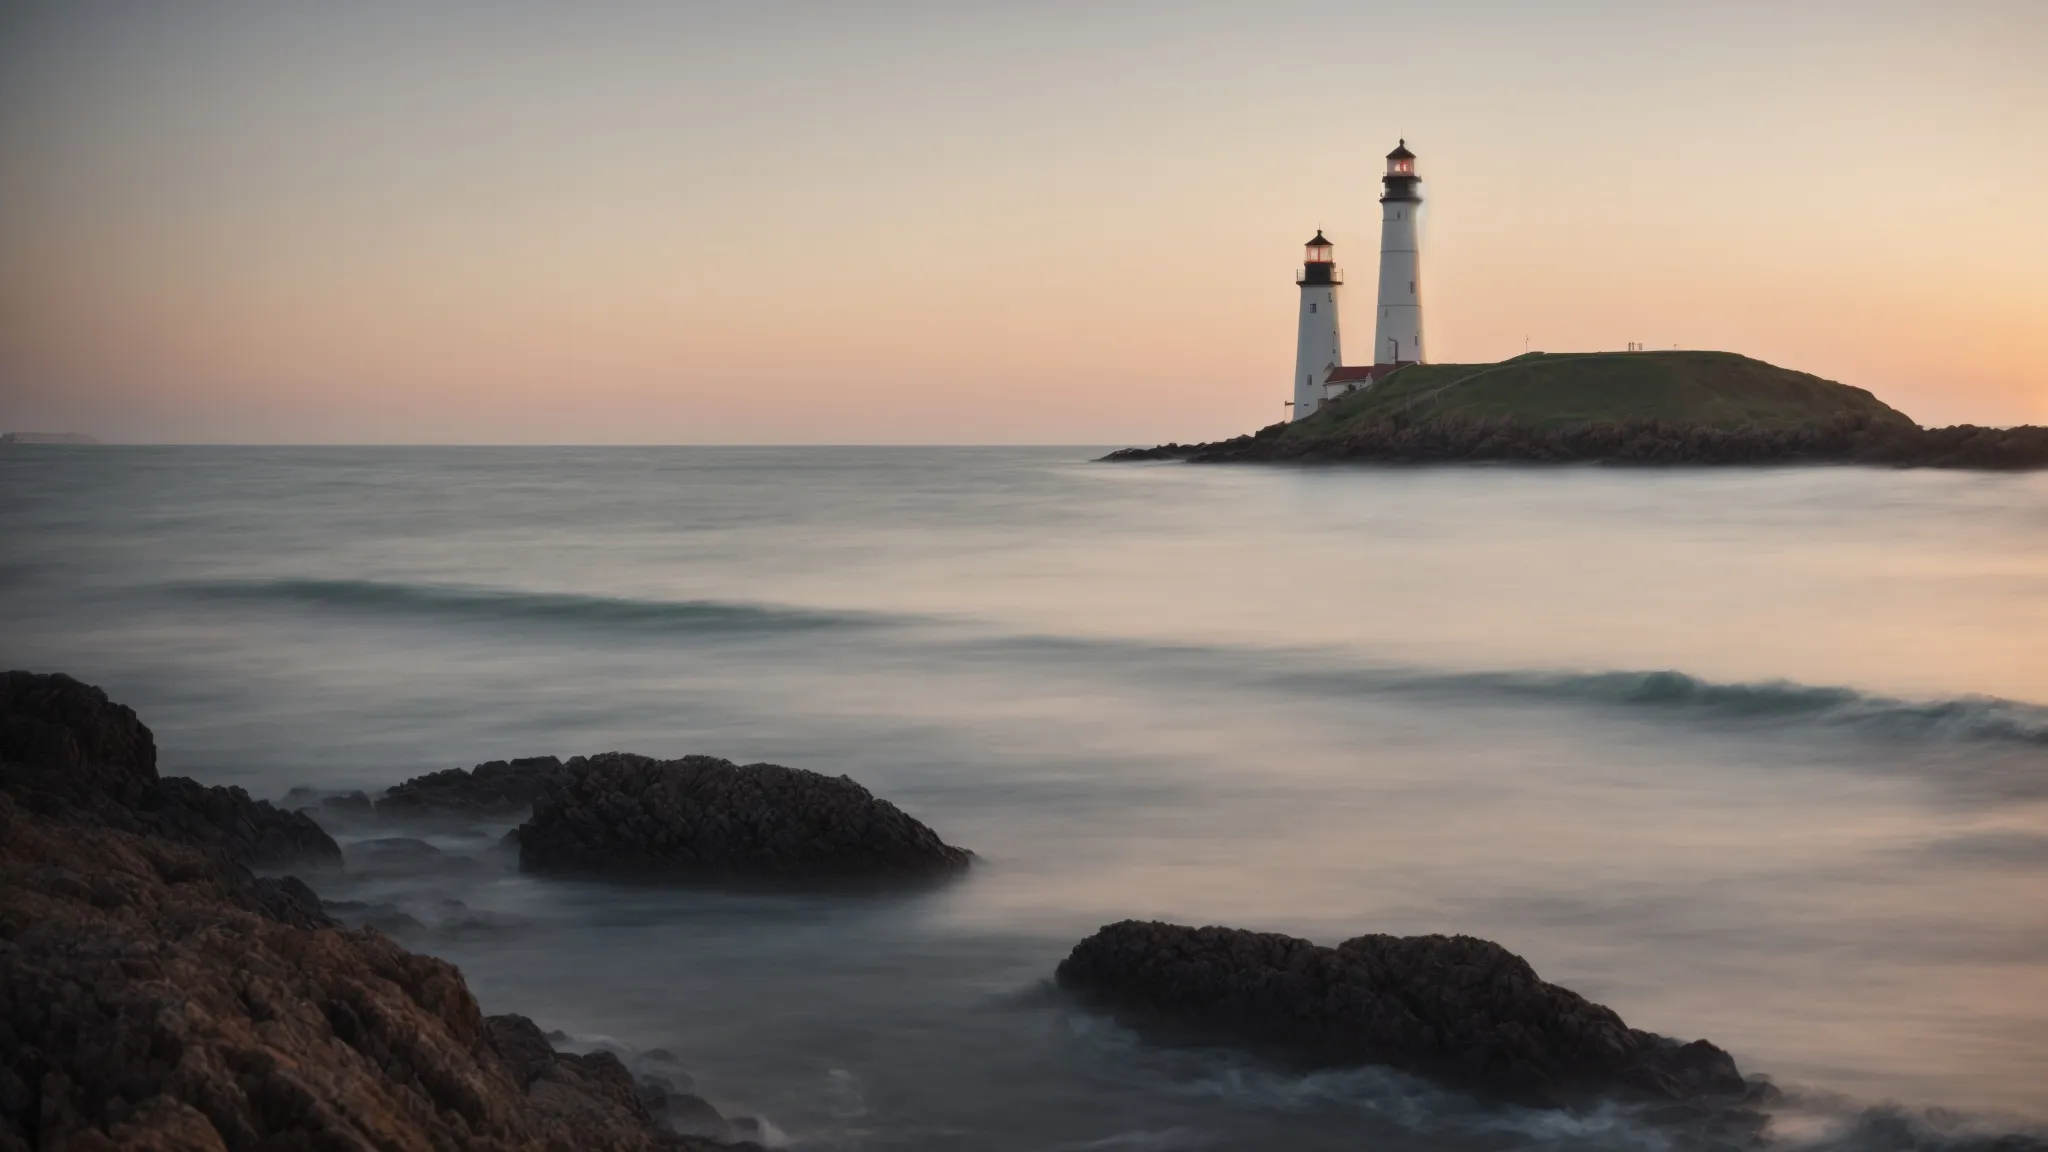 a calm sea at dawn, with a towering lighthouse standing as a beacon amidst the soft glow of the rising sun.